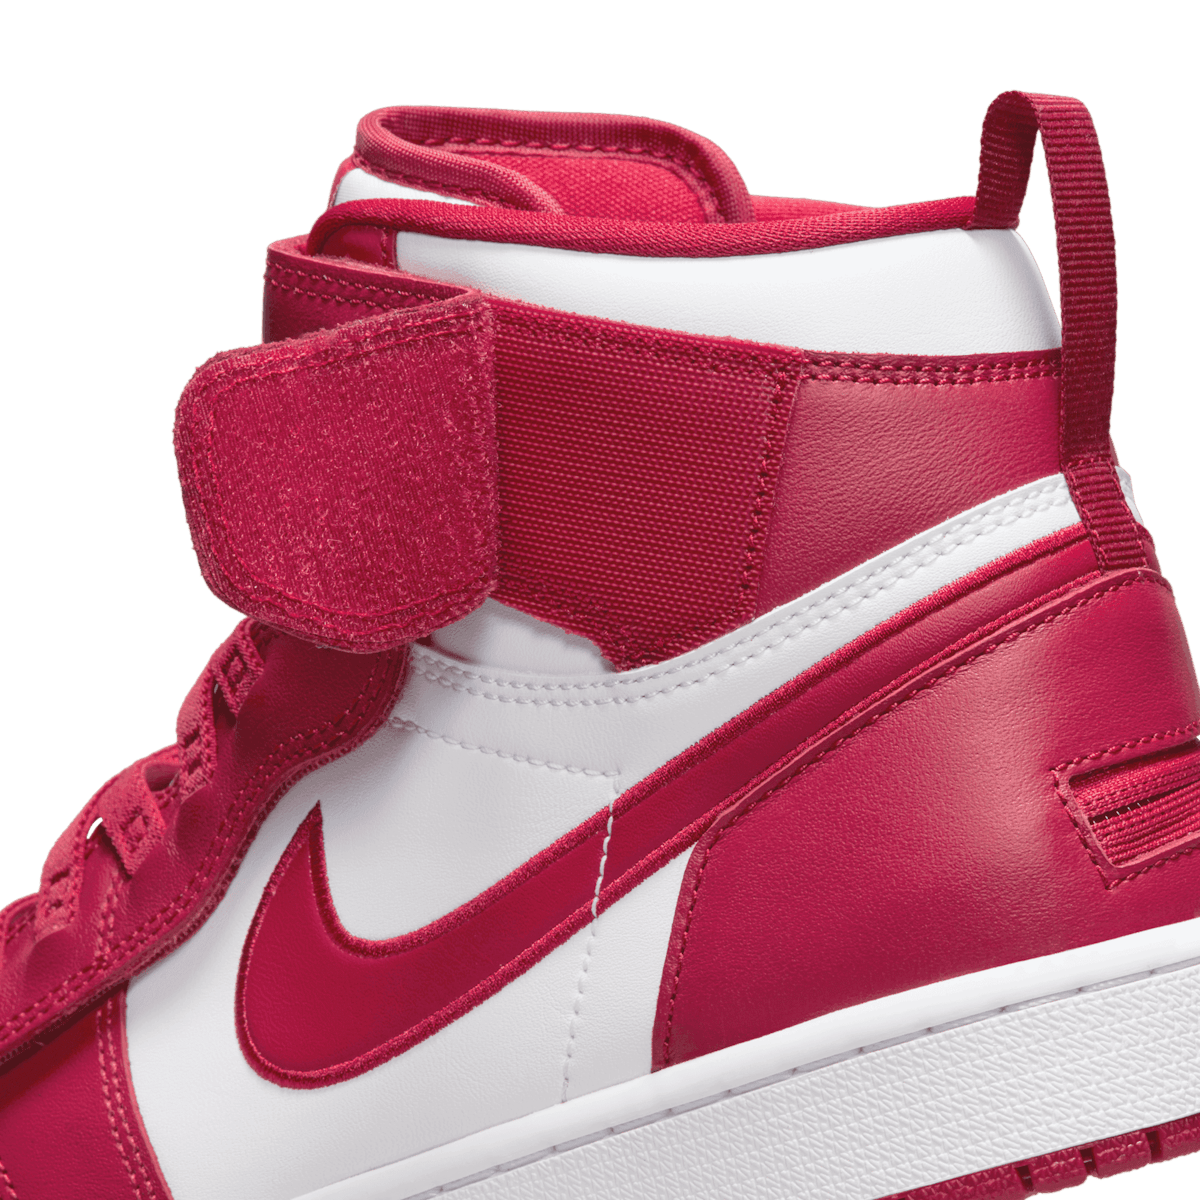 Jordan 1 Flyease Red and White Angle 7